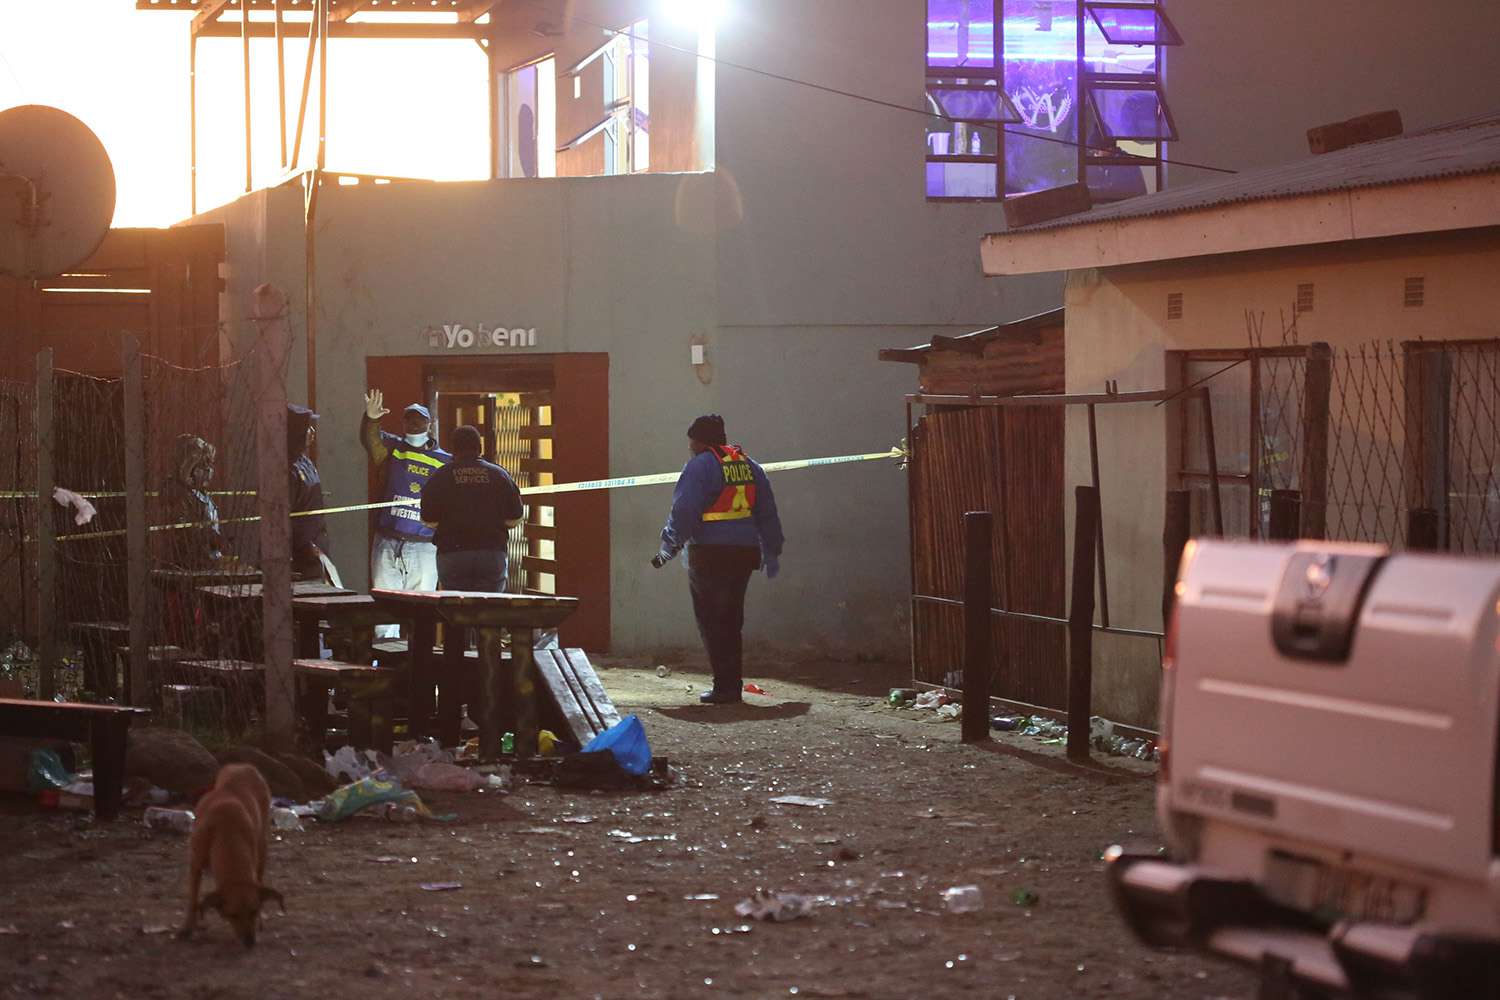 South African Police Forces (SAPS) and forensics experts work at the scene where an estimated 20 young people died in Enyobeni Tavern in East London, South Africa